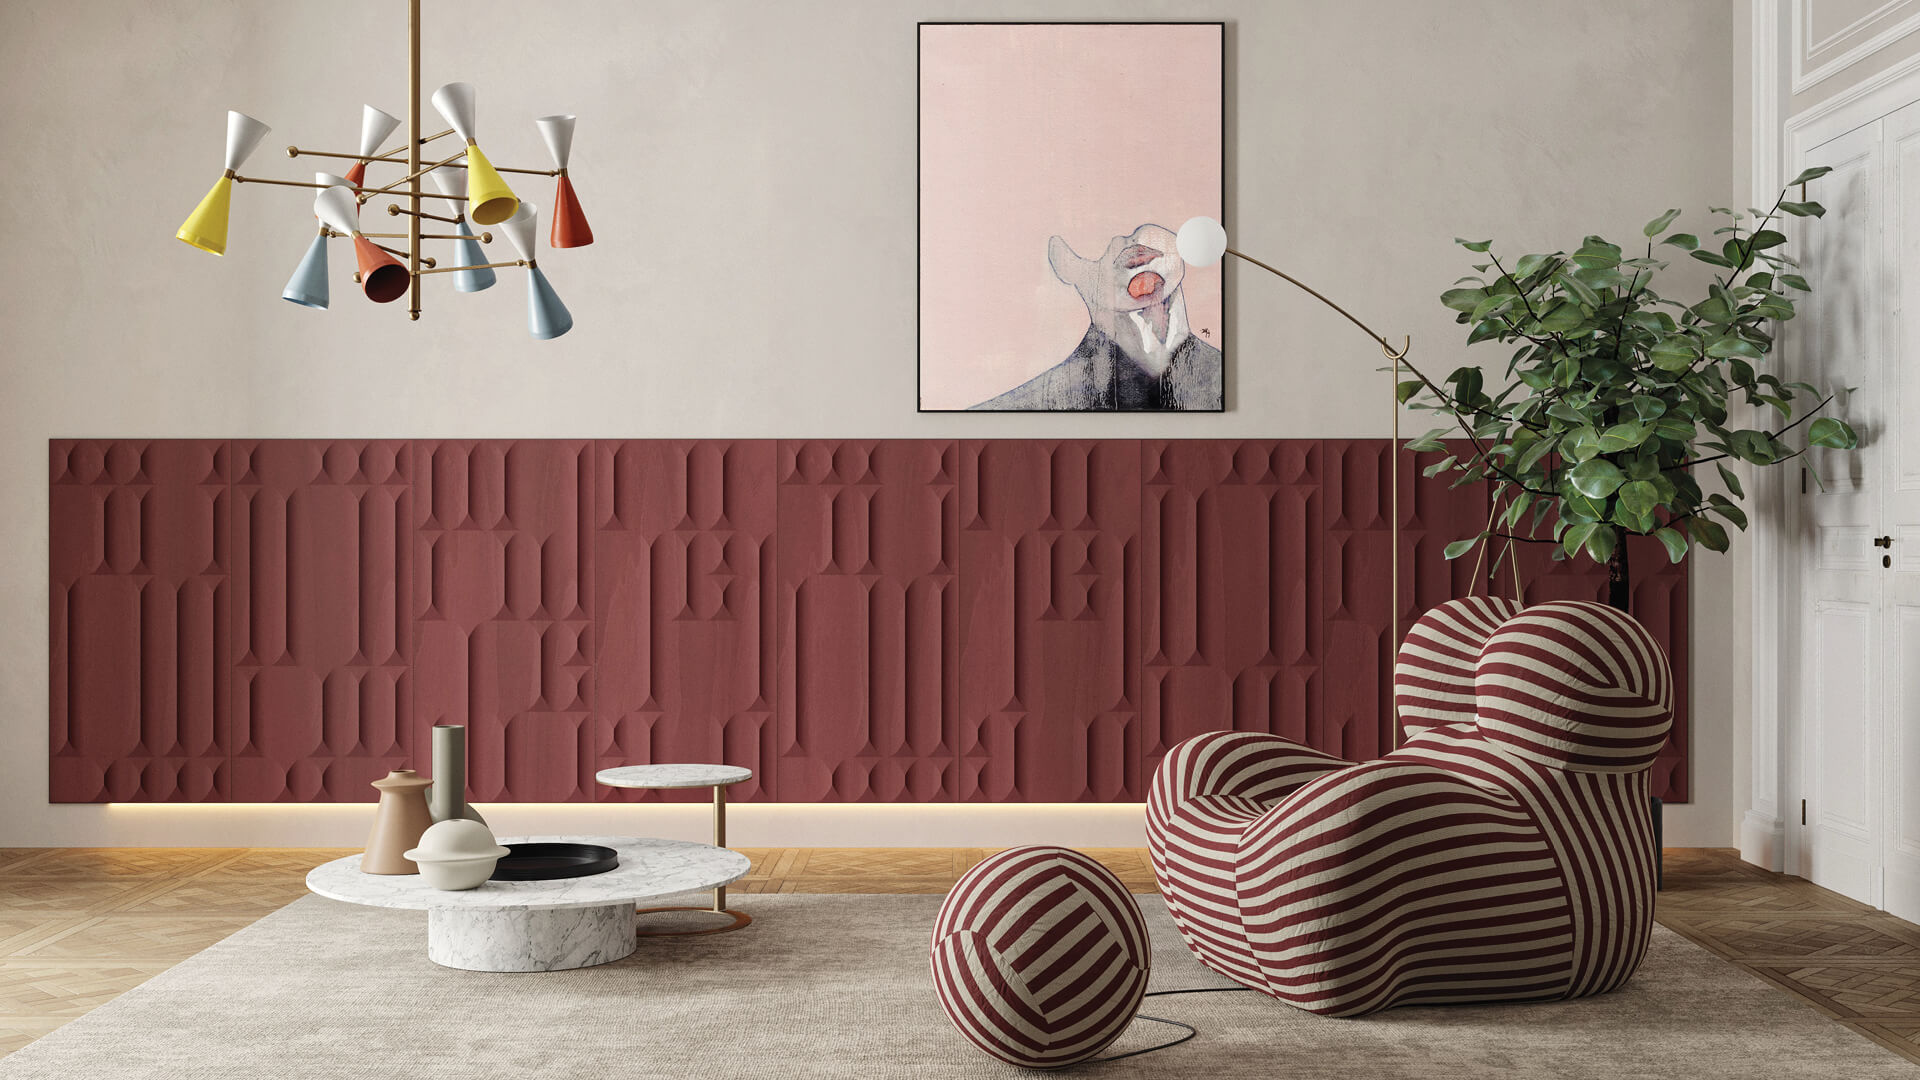 Inkiostro Bianco weaves emotions in design with their latest wall coverings and rugs